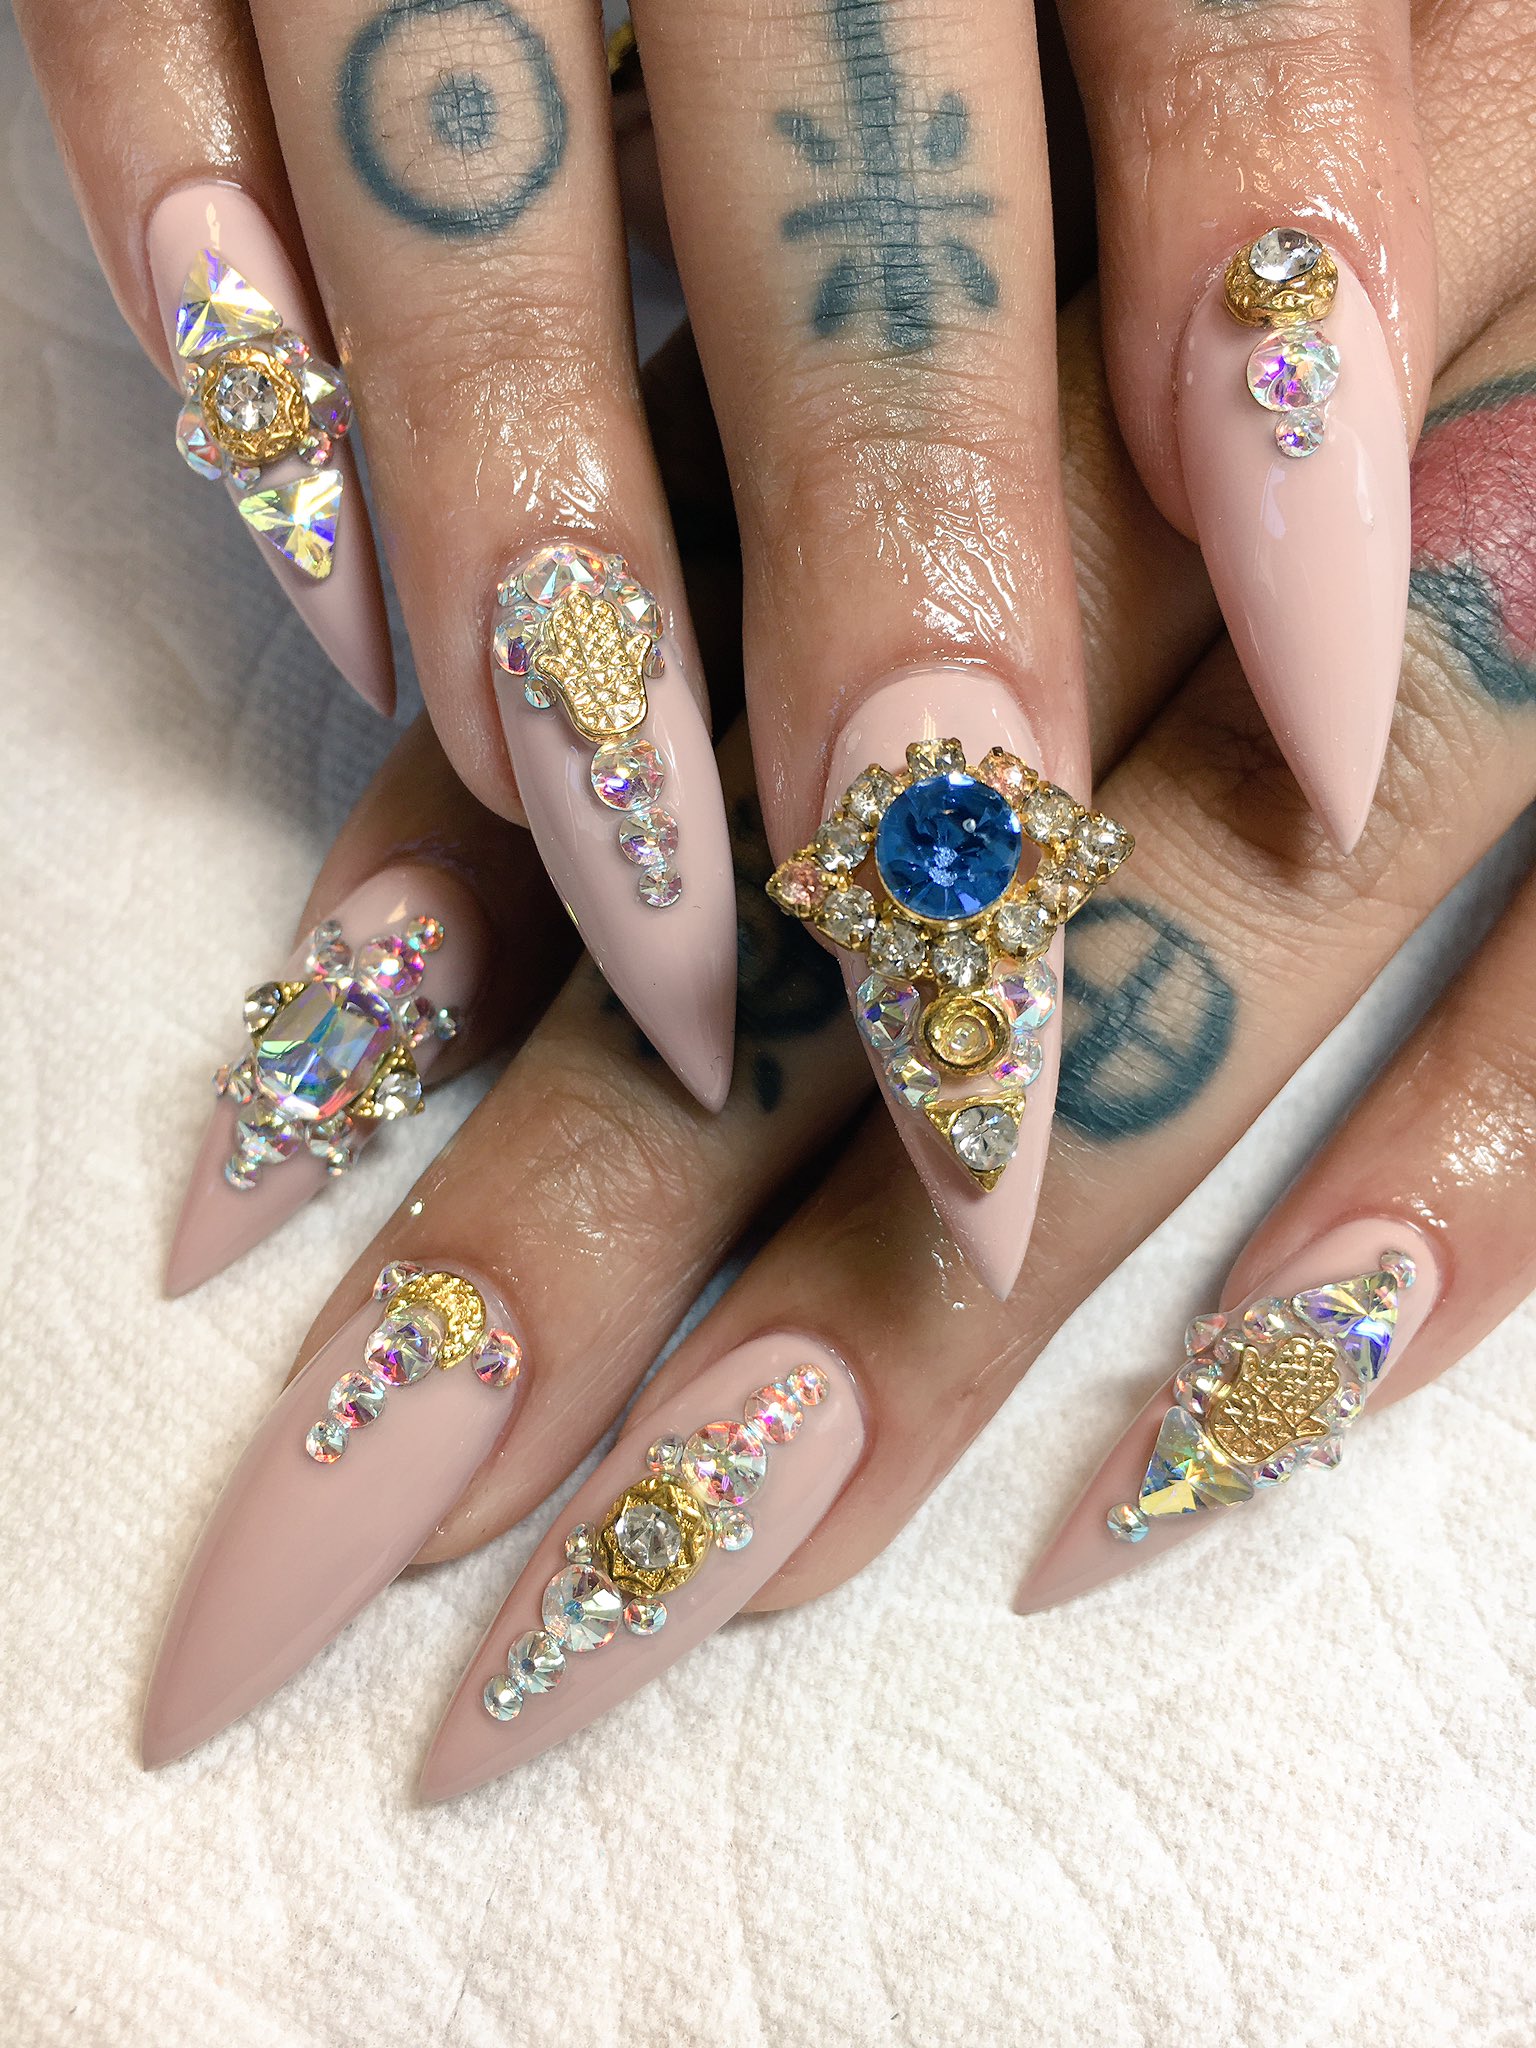 Are Evil Eye Nails The Next Big Thing?